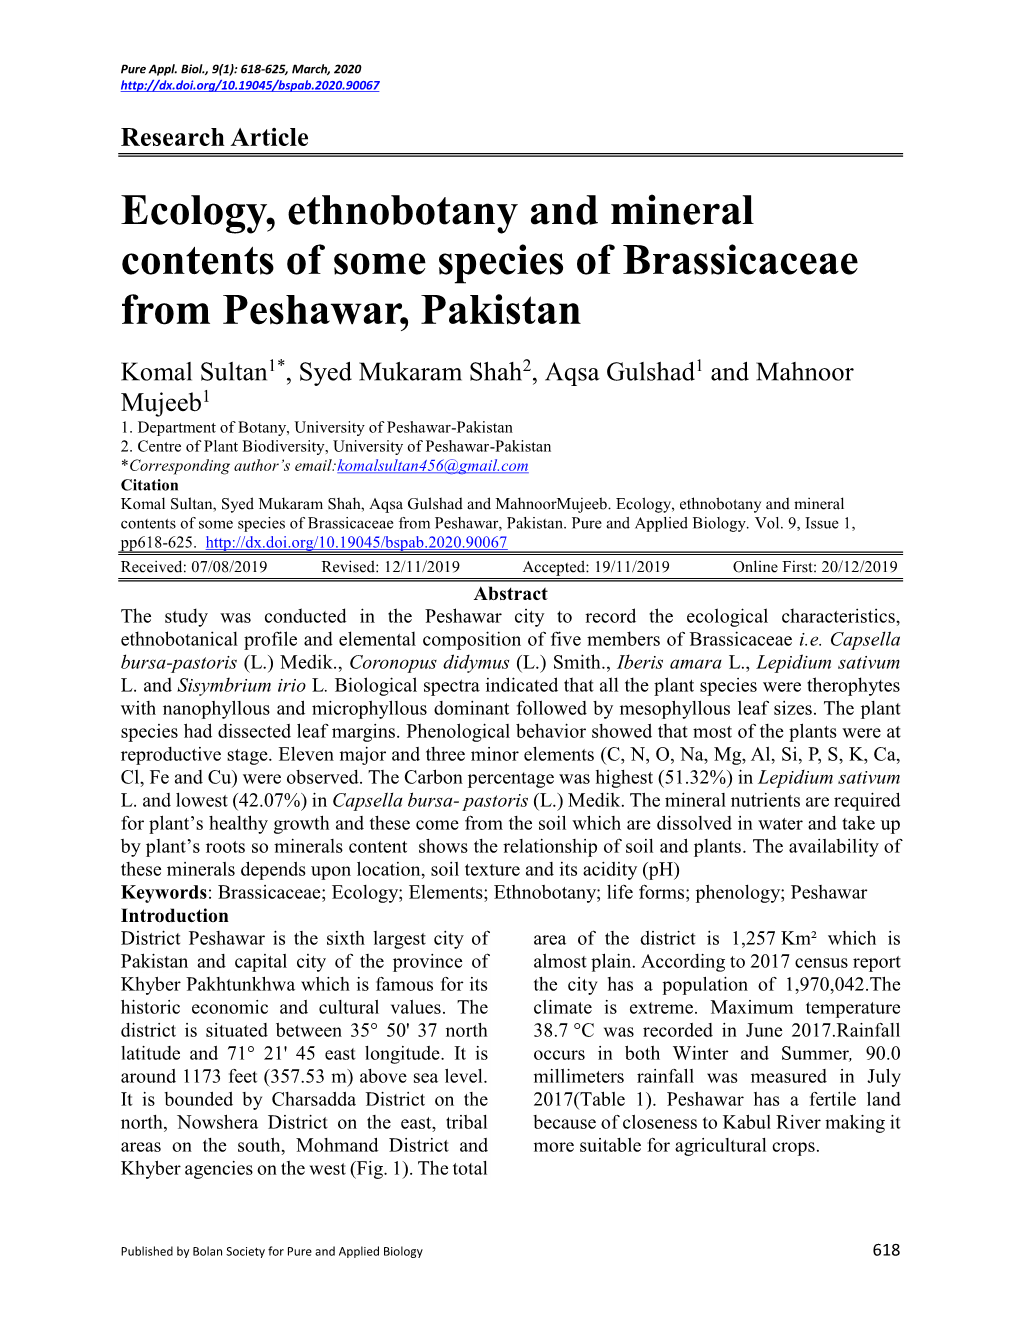 Ecology, Ethnobotany and Mineral Contents of Some Species of Brassicaceae from Peshawar, Pakistan